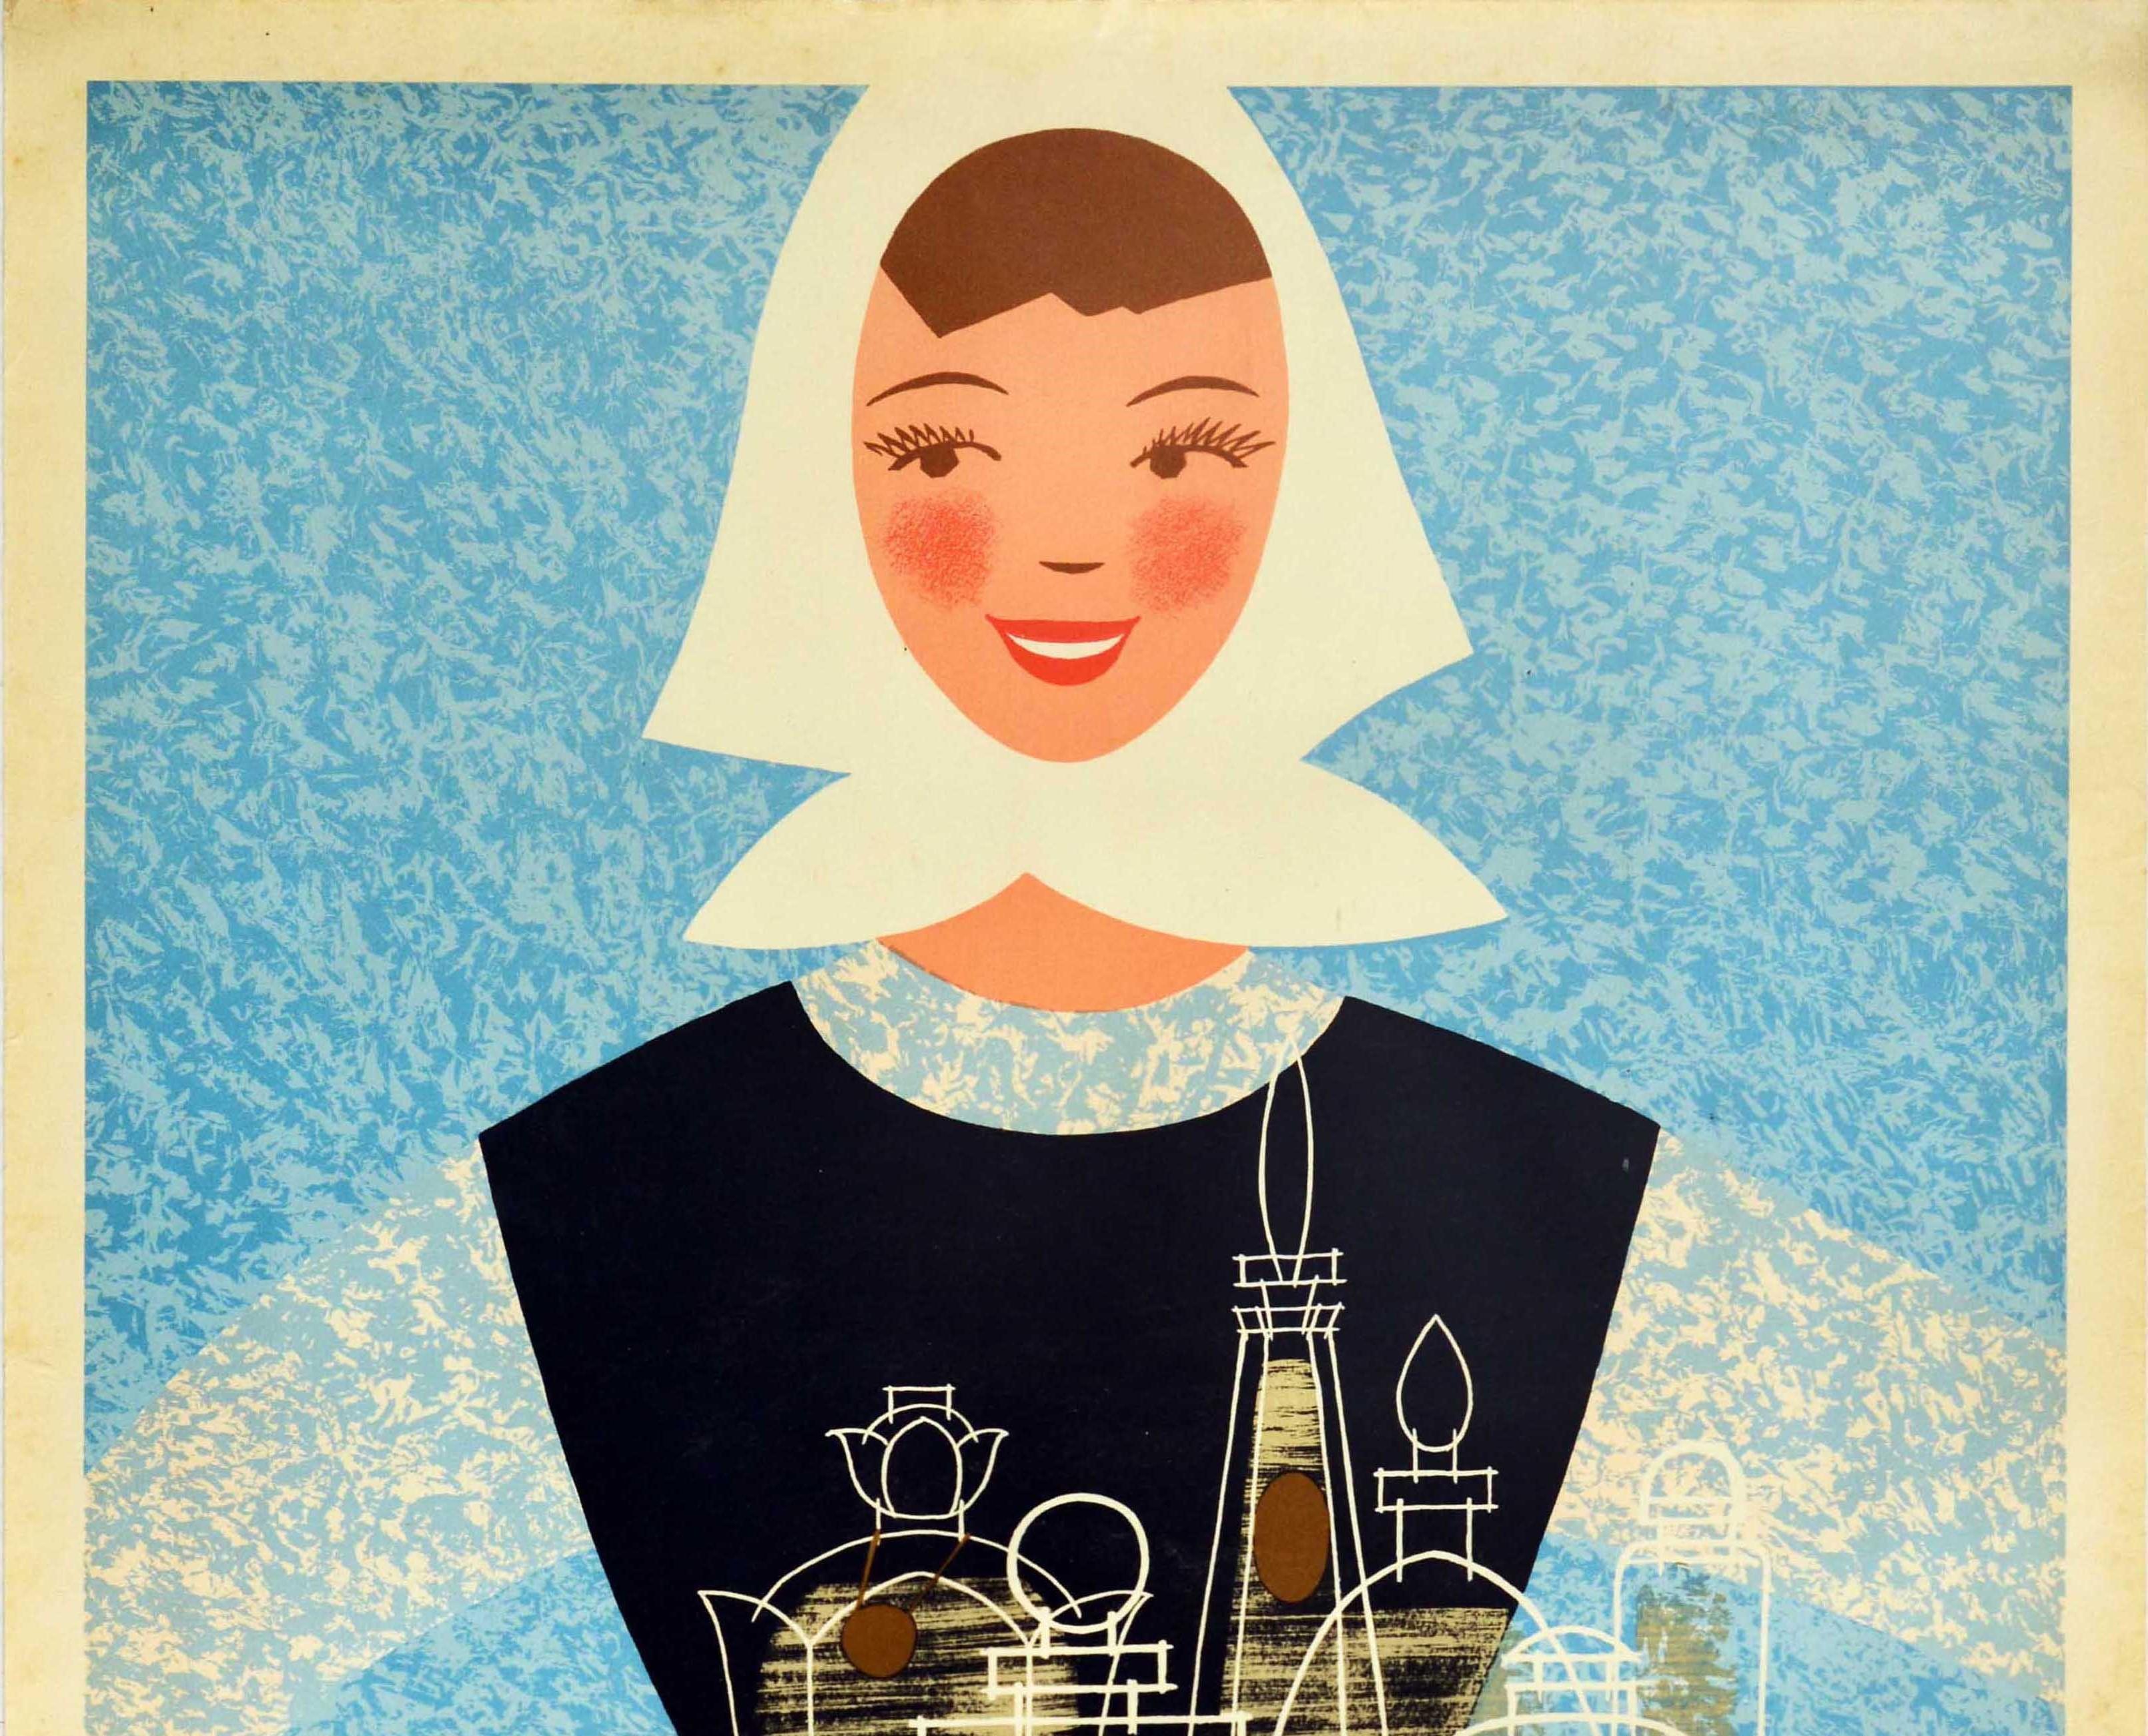 Original vintage advertising poster - Perfumery Sojuzchimexport Moscow - featuring a Mid-Century Modern design depicting a smiling young lady dressed in a blue and white top, brown skirt and white headscarf, holding a cloth with glass jars of